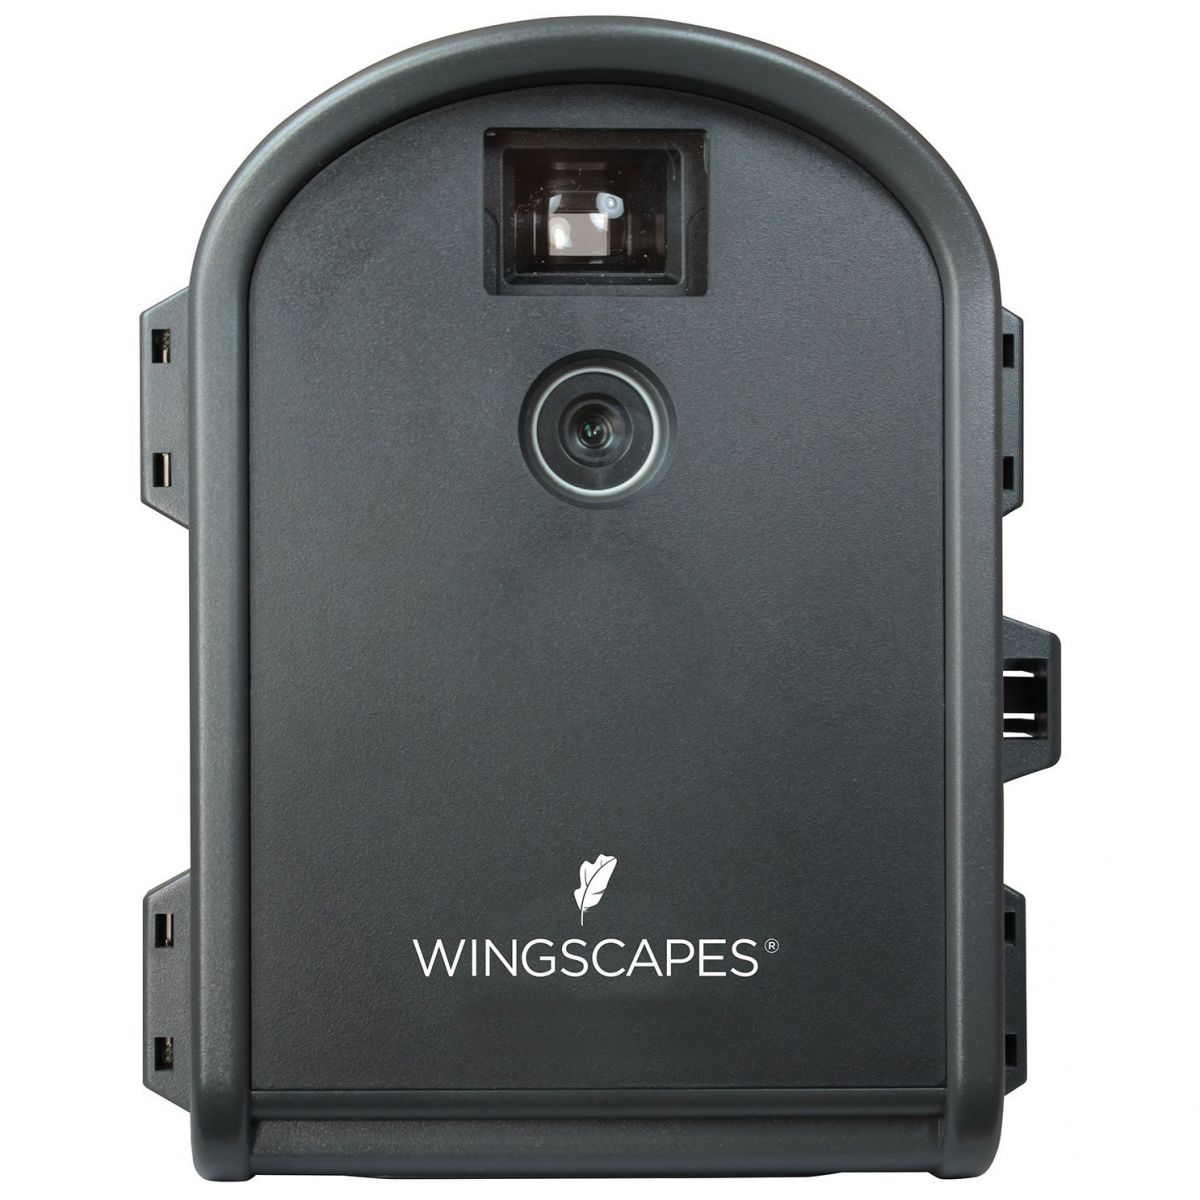 Wingscapes TimelapseCam